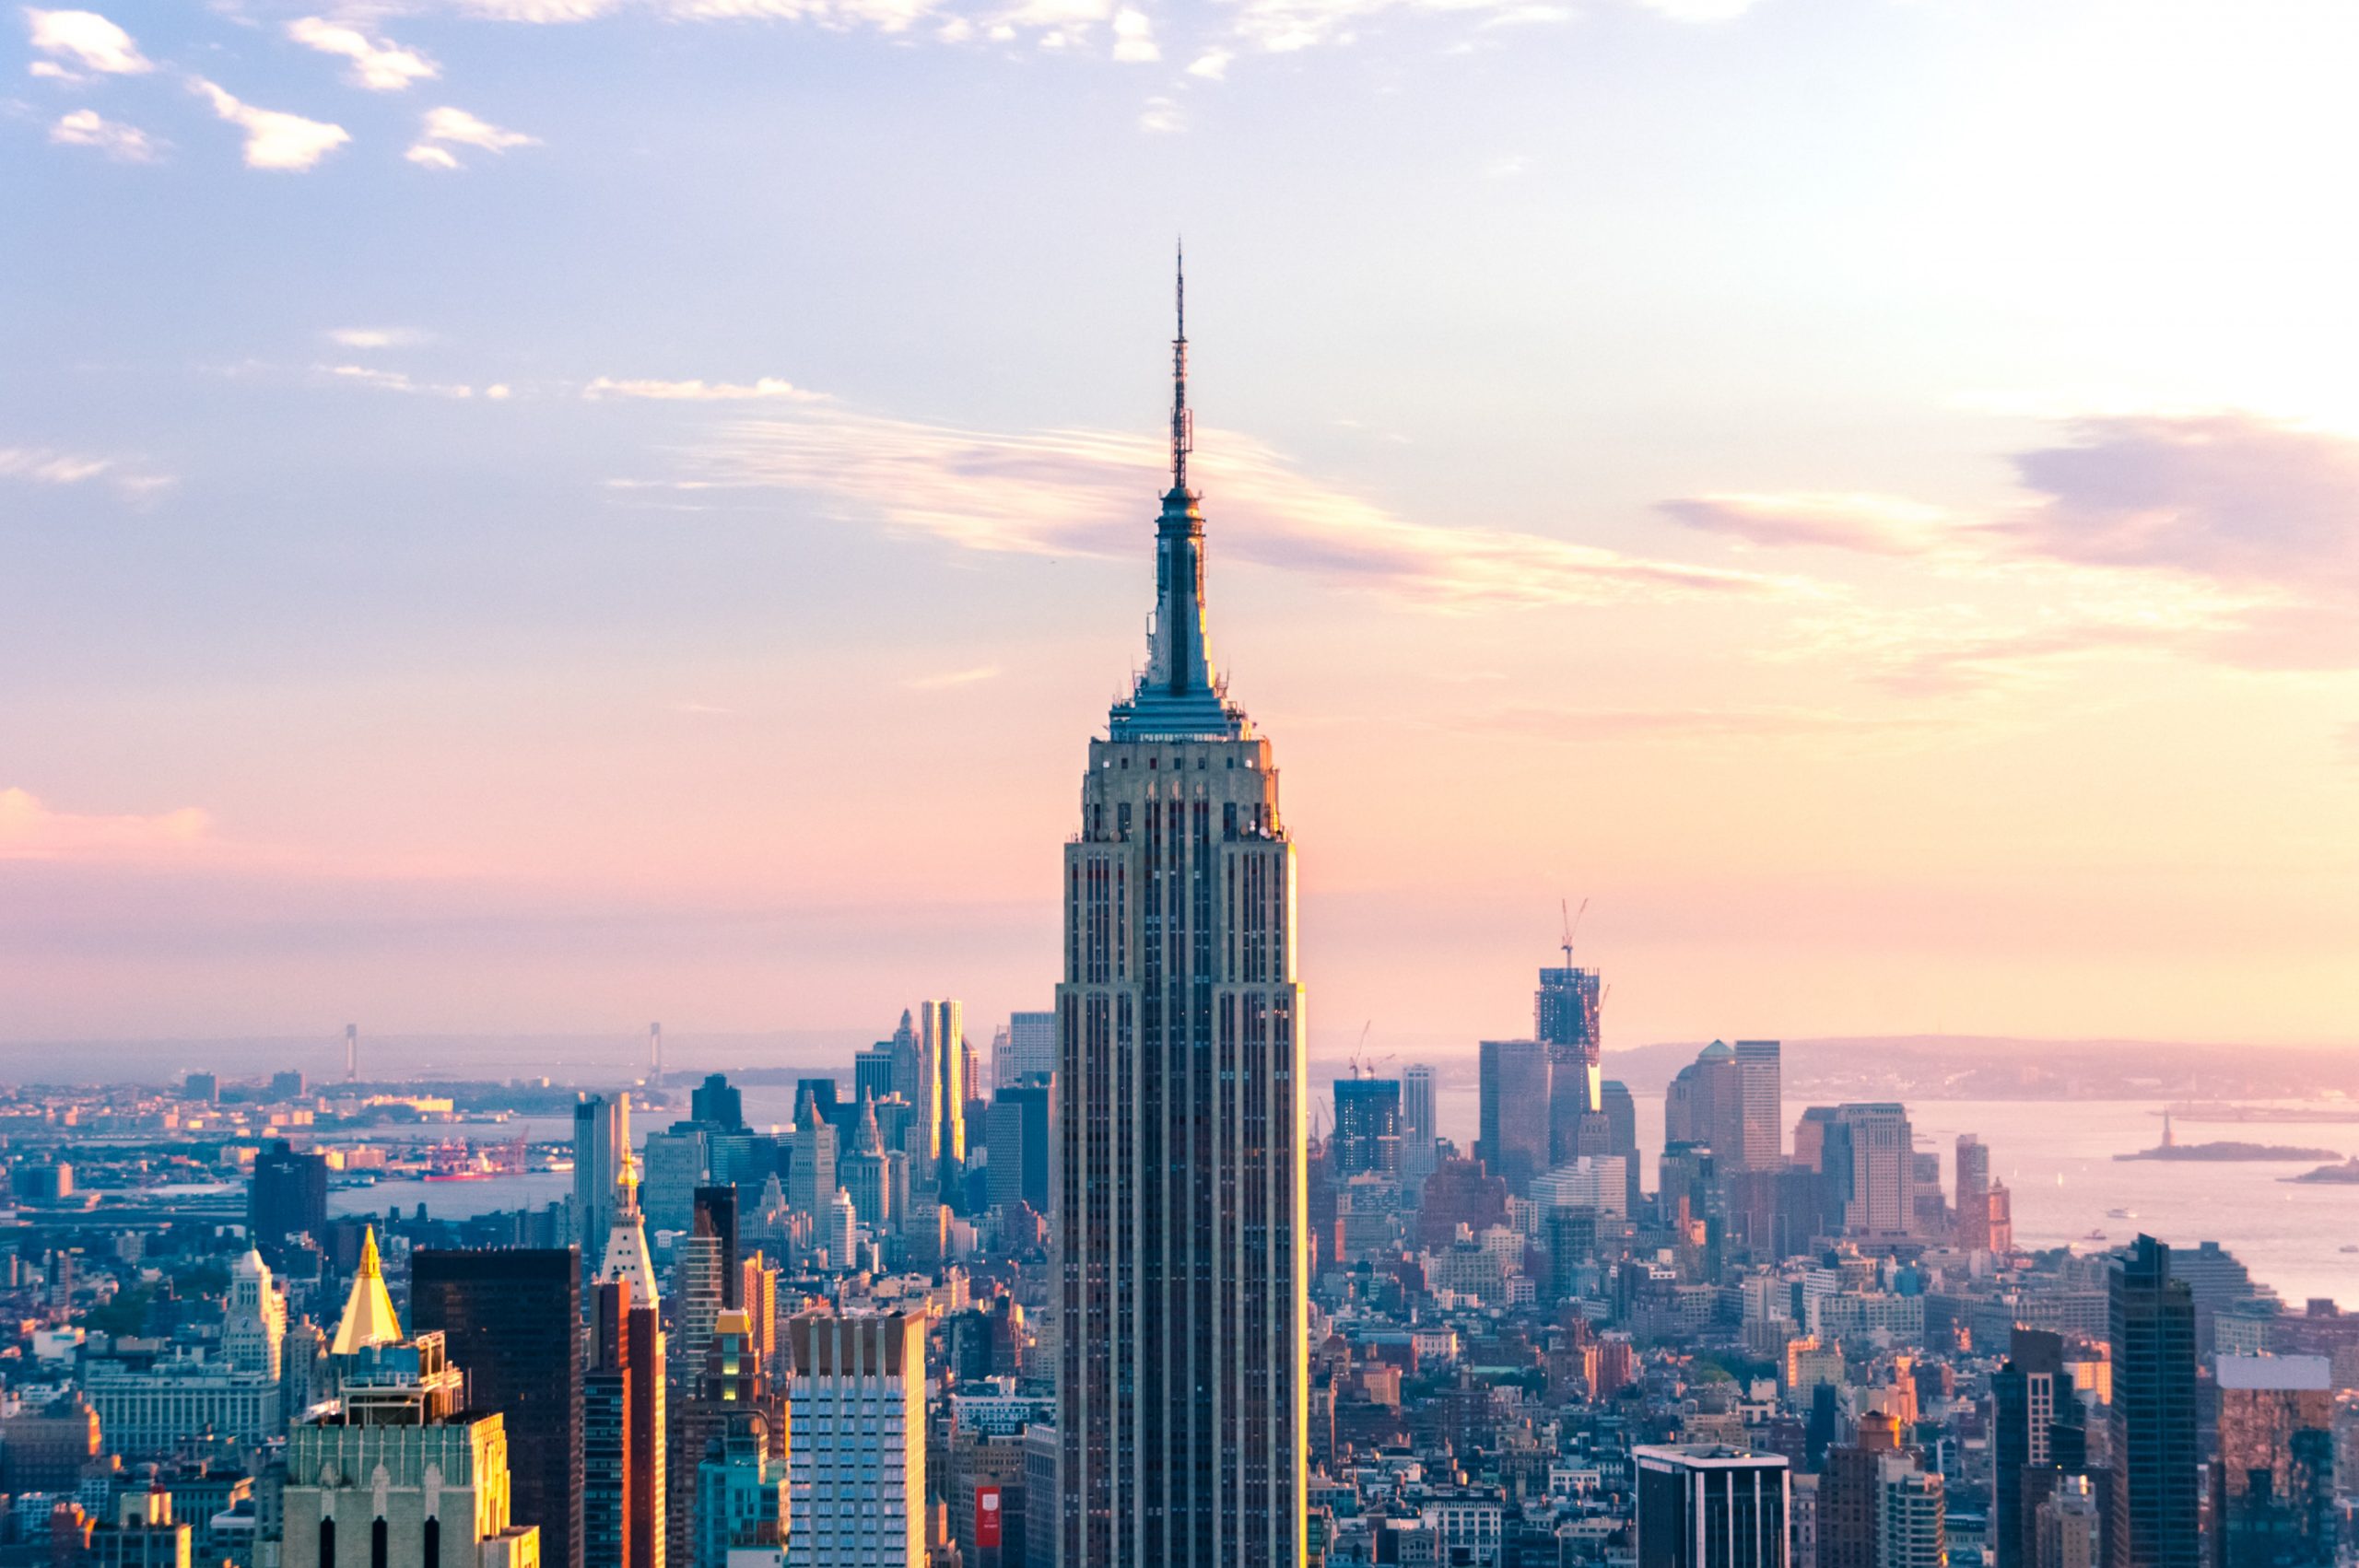 Empire state building during sunset - stay in midtown to be close to attractions